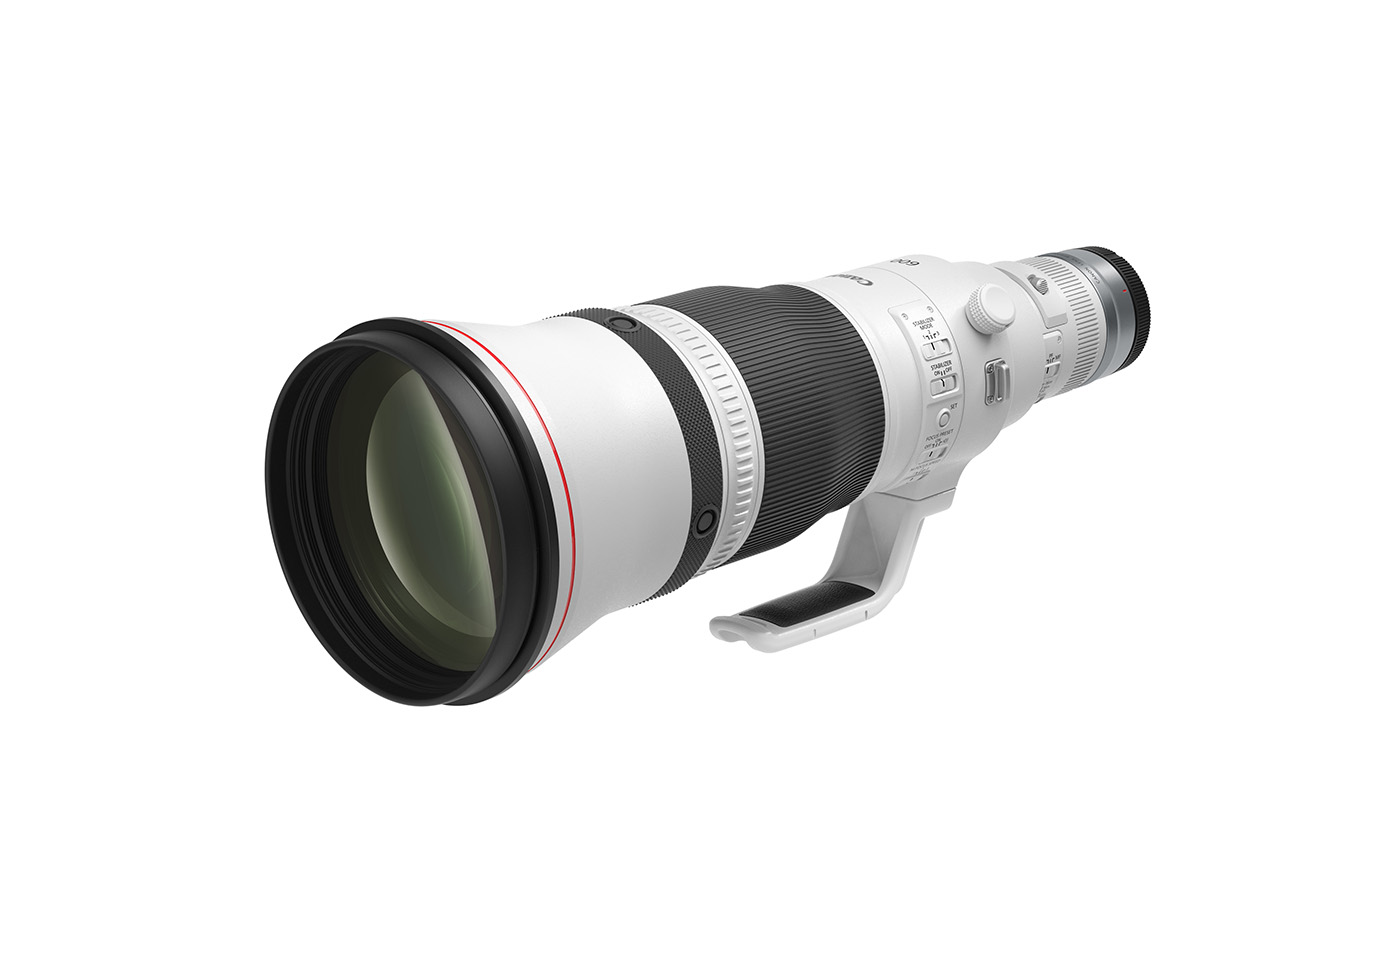 Front profile image of RF 600mm f/4 L IS USM telephoto lens